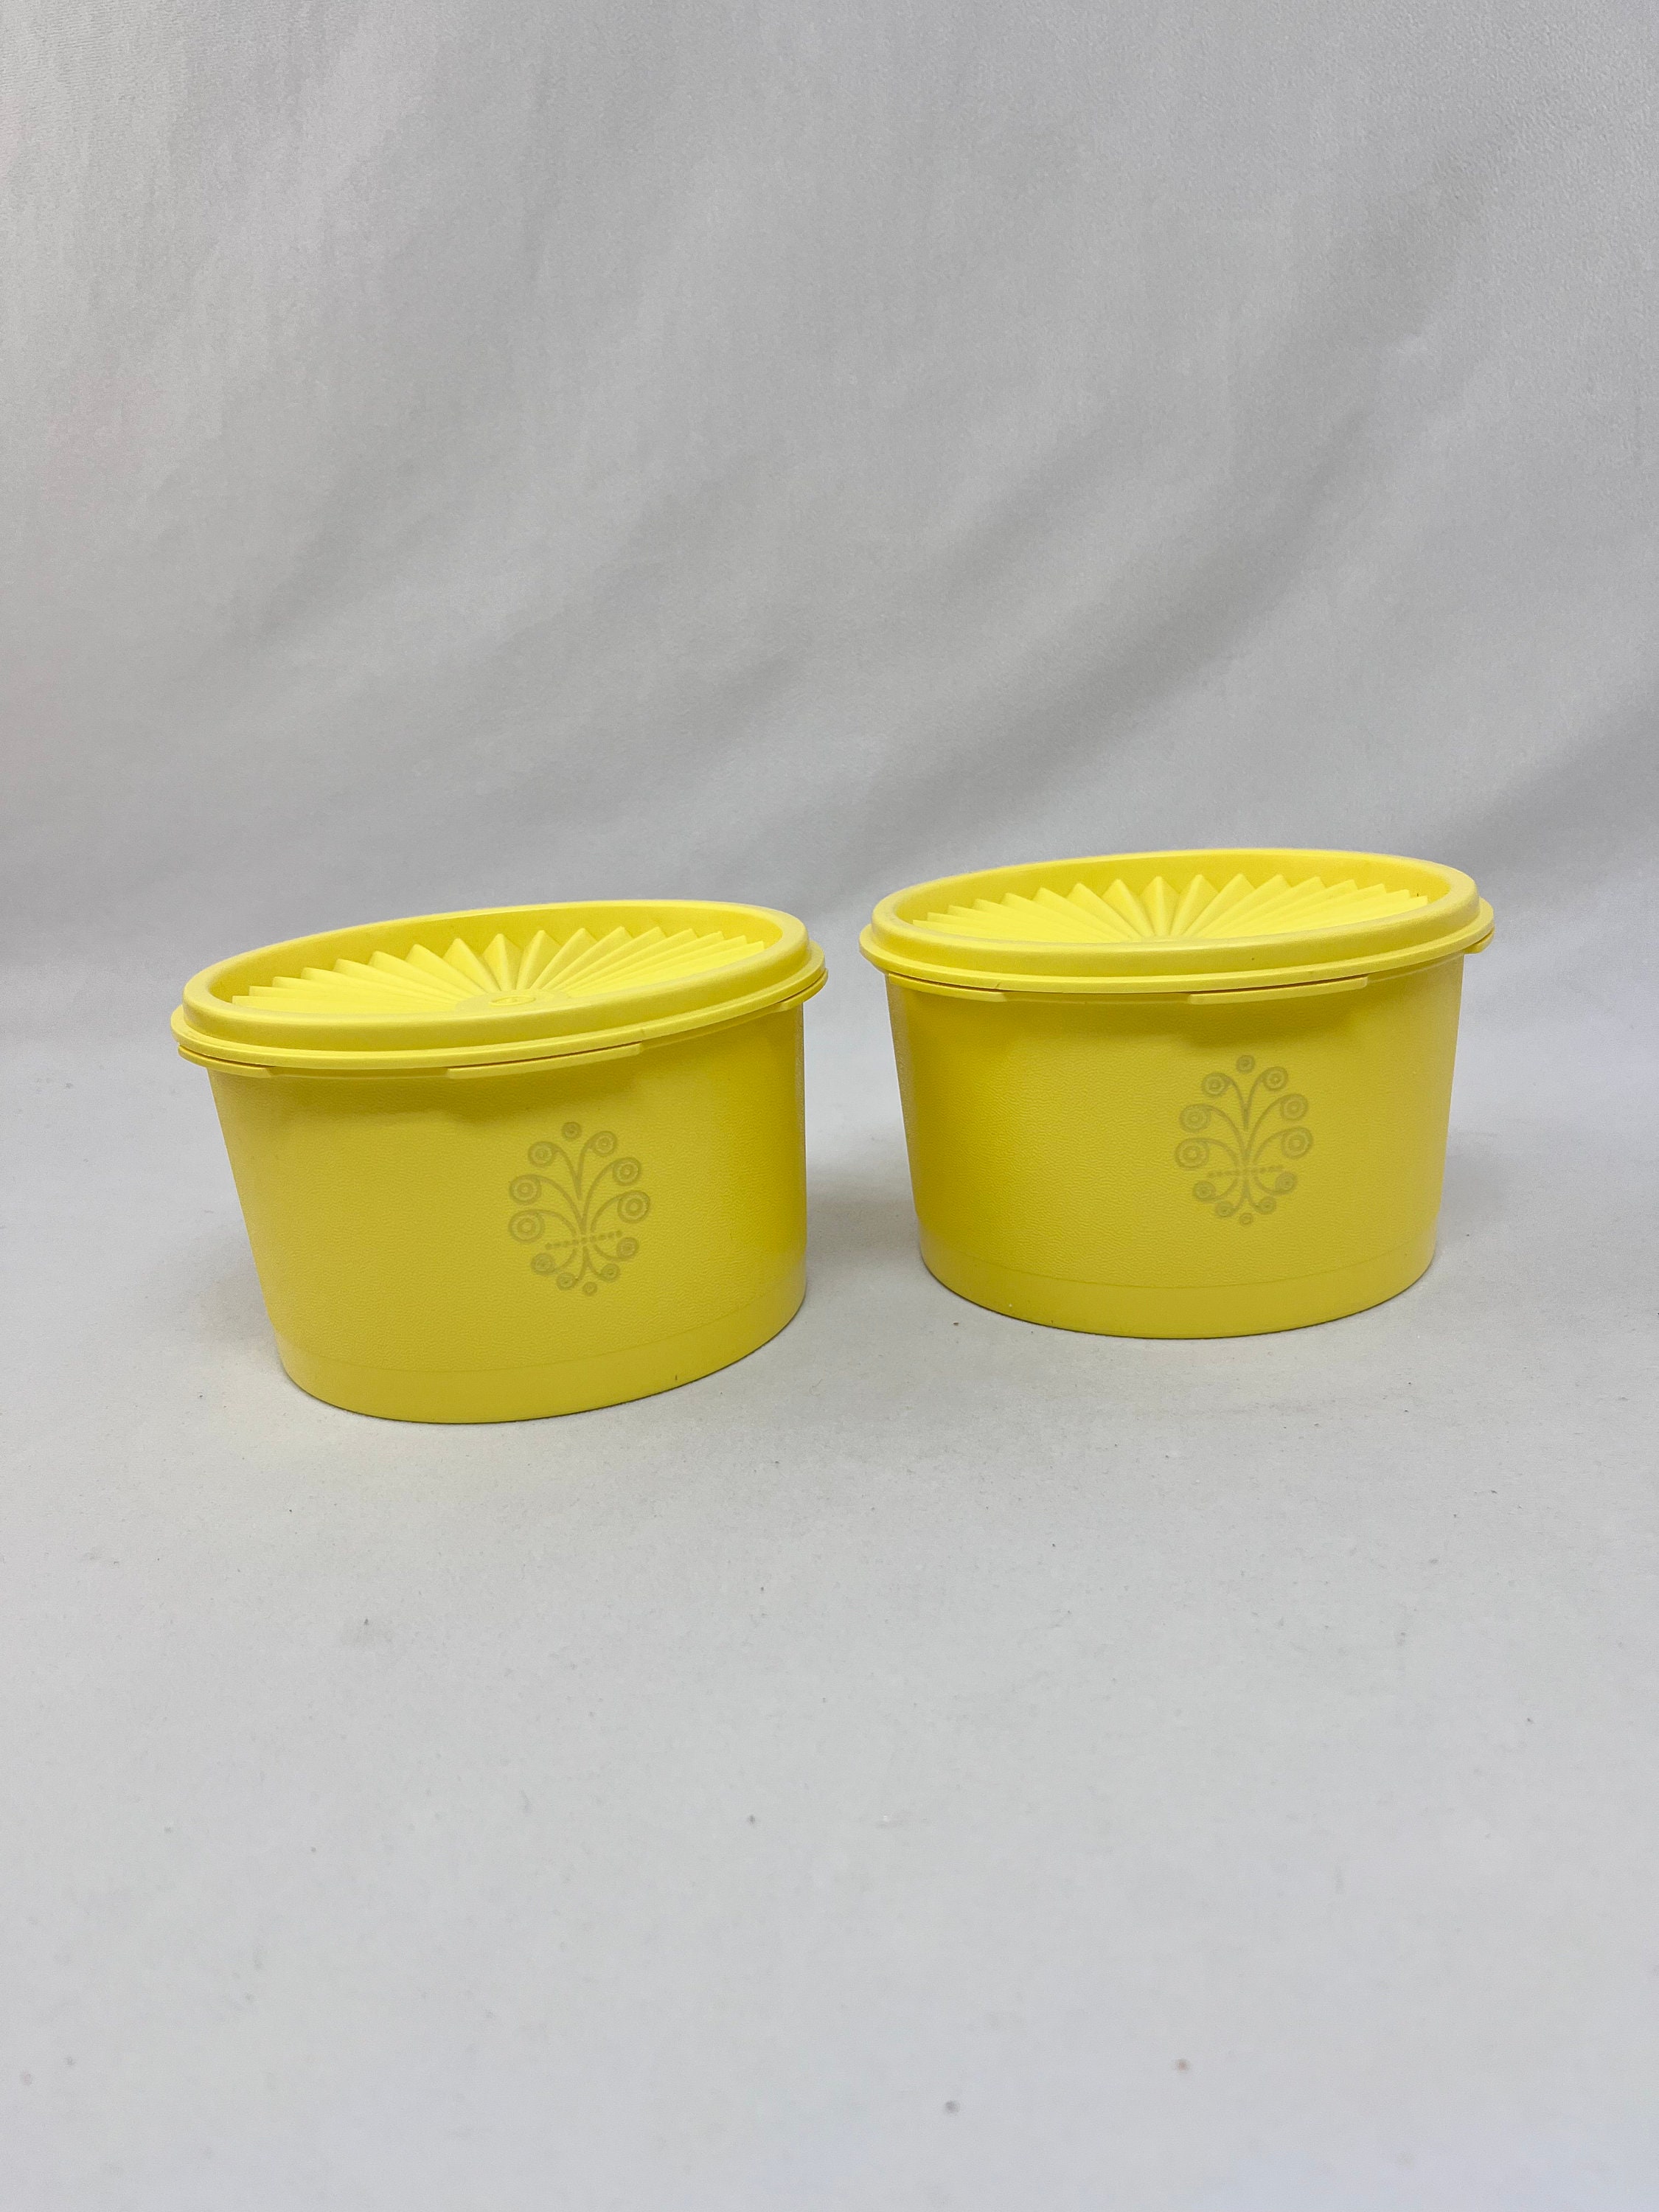 VINTAGE Yellow Tupperware Canister with Lid 805-8 – Starboard Home